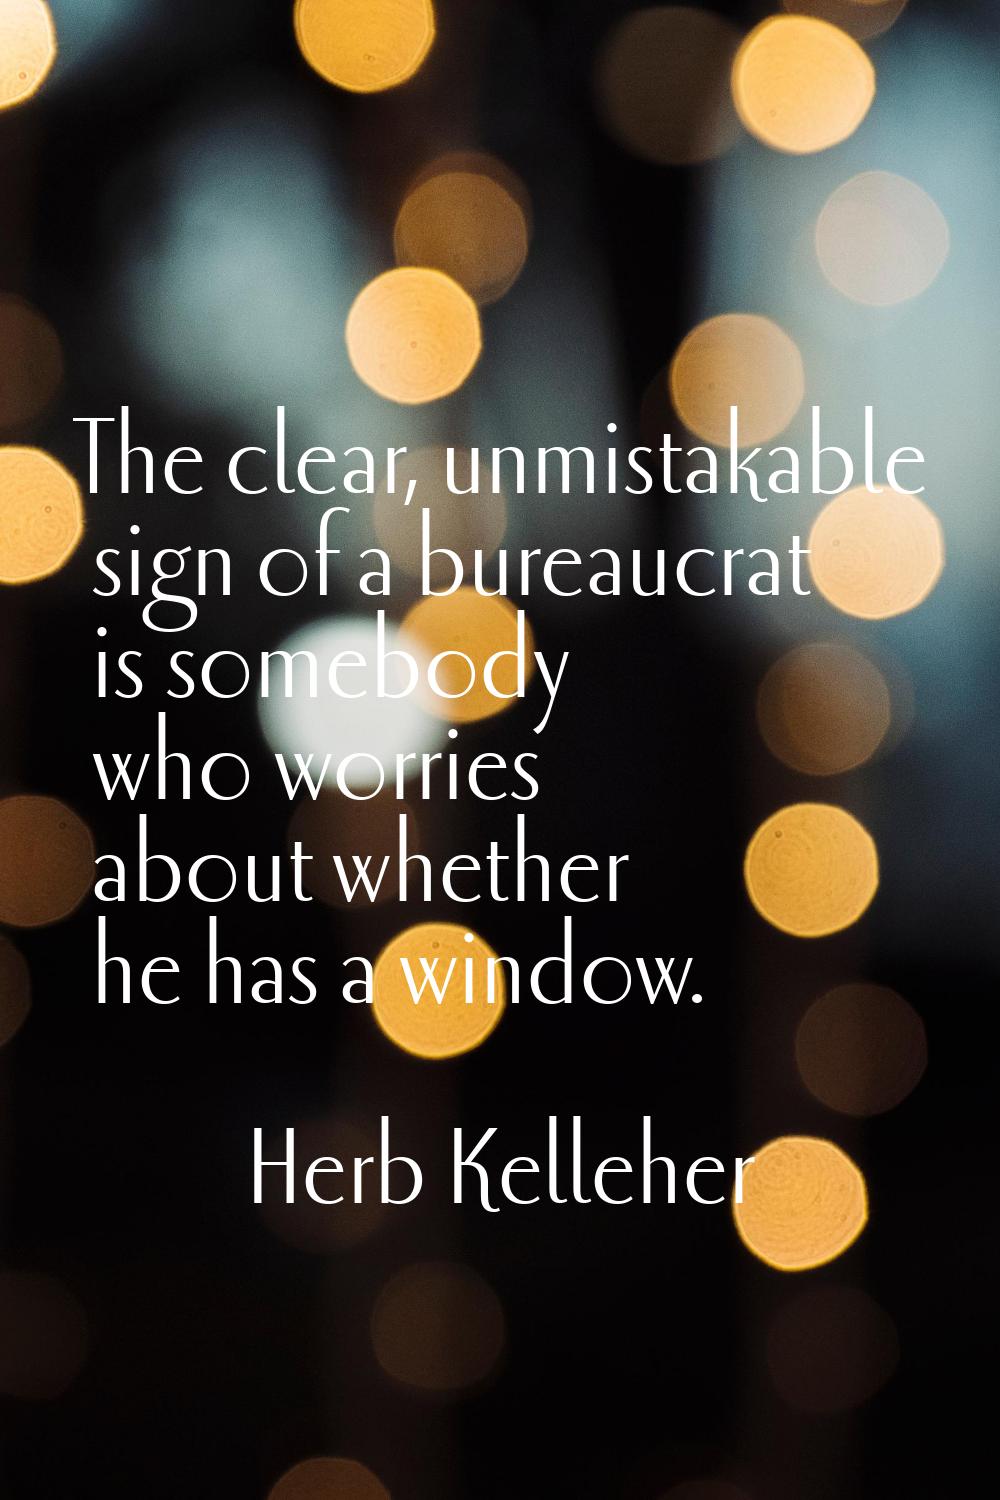 The clear, unmistakable sign of a bureaucrat is somebody who worries about whether he has a window.